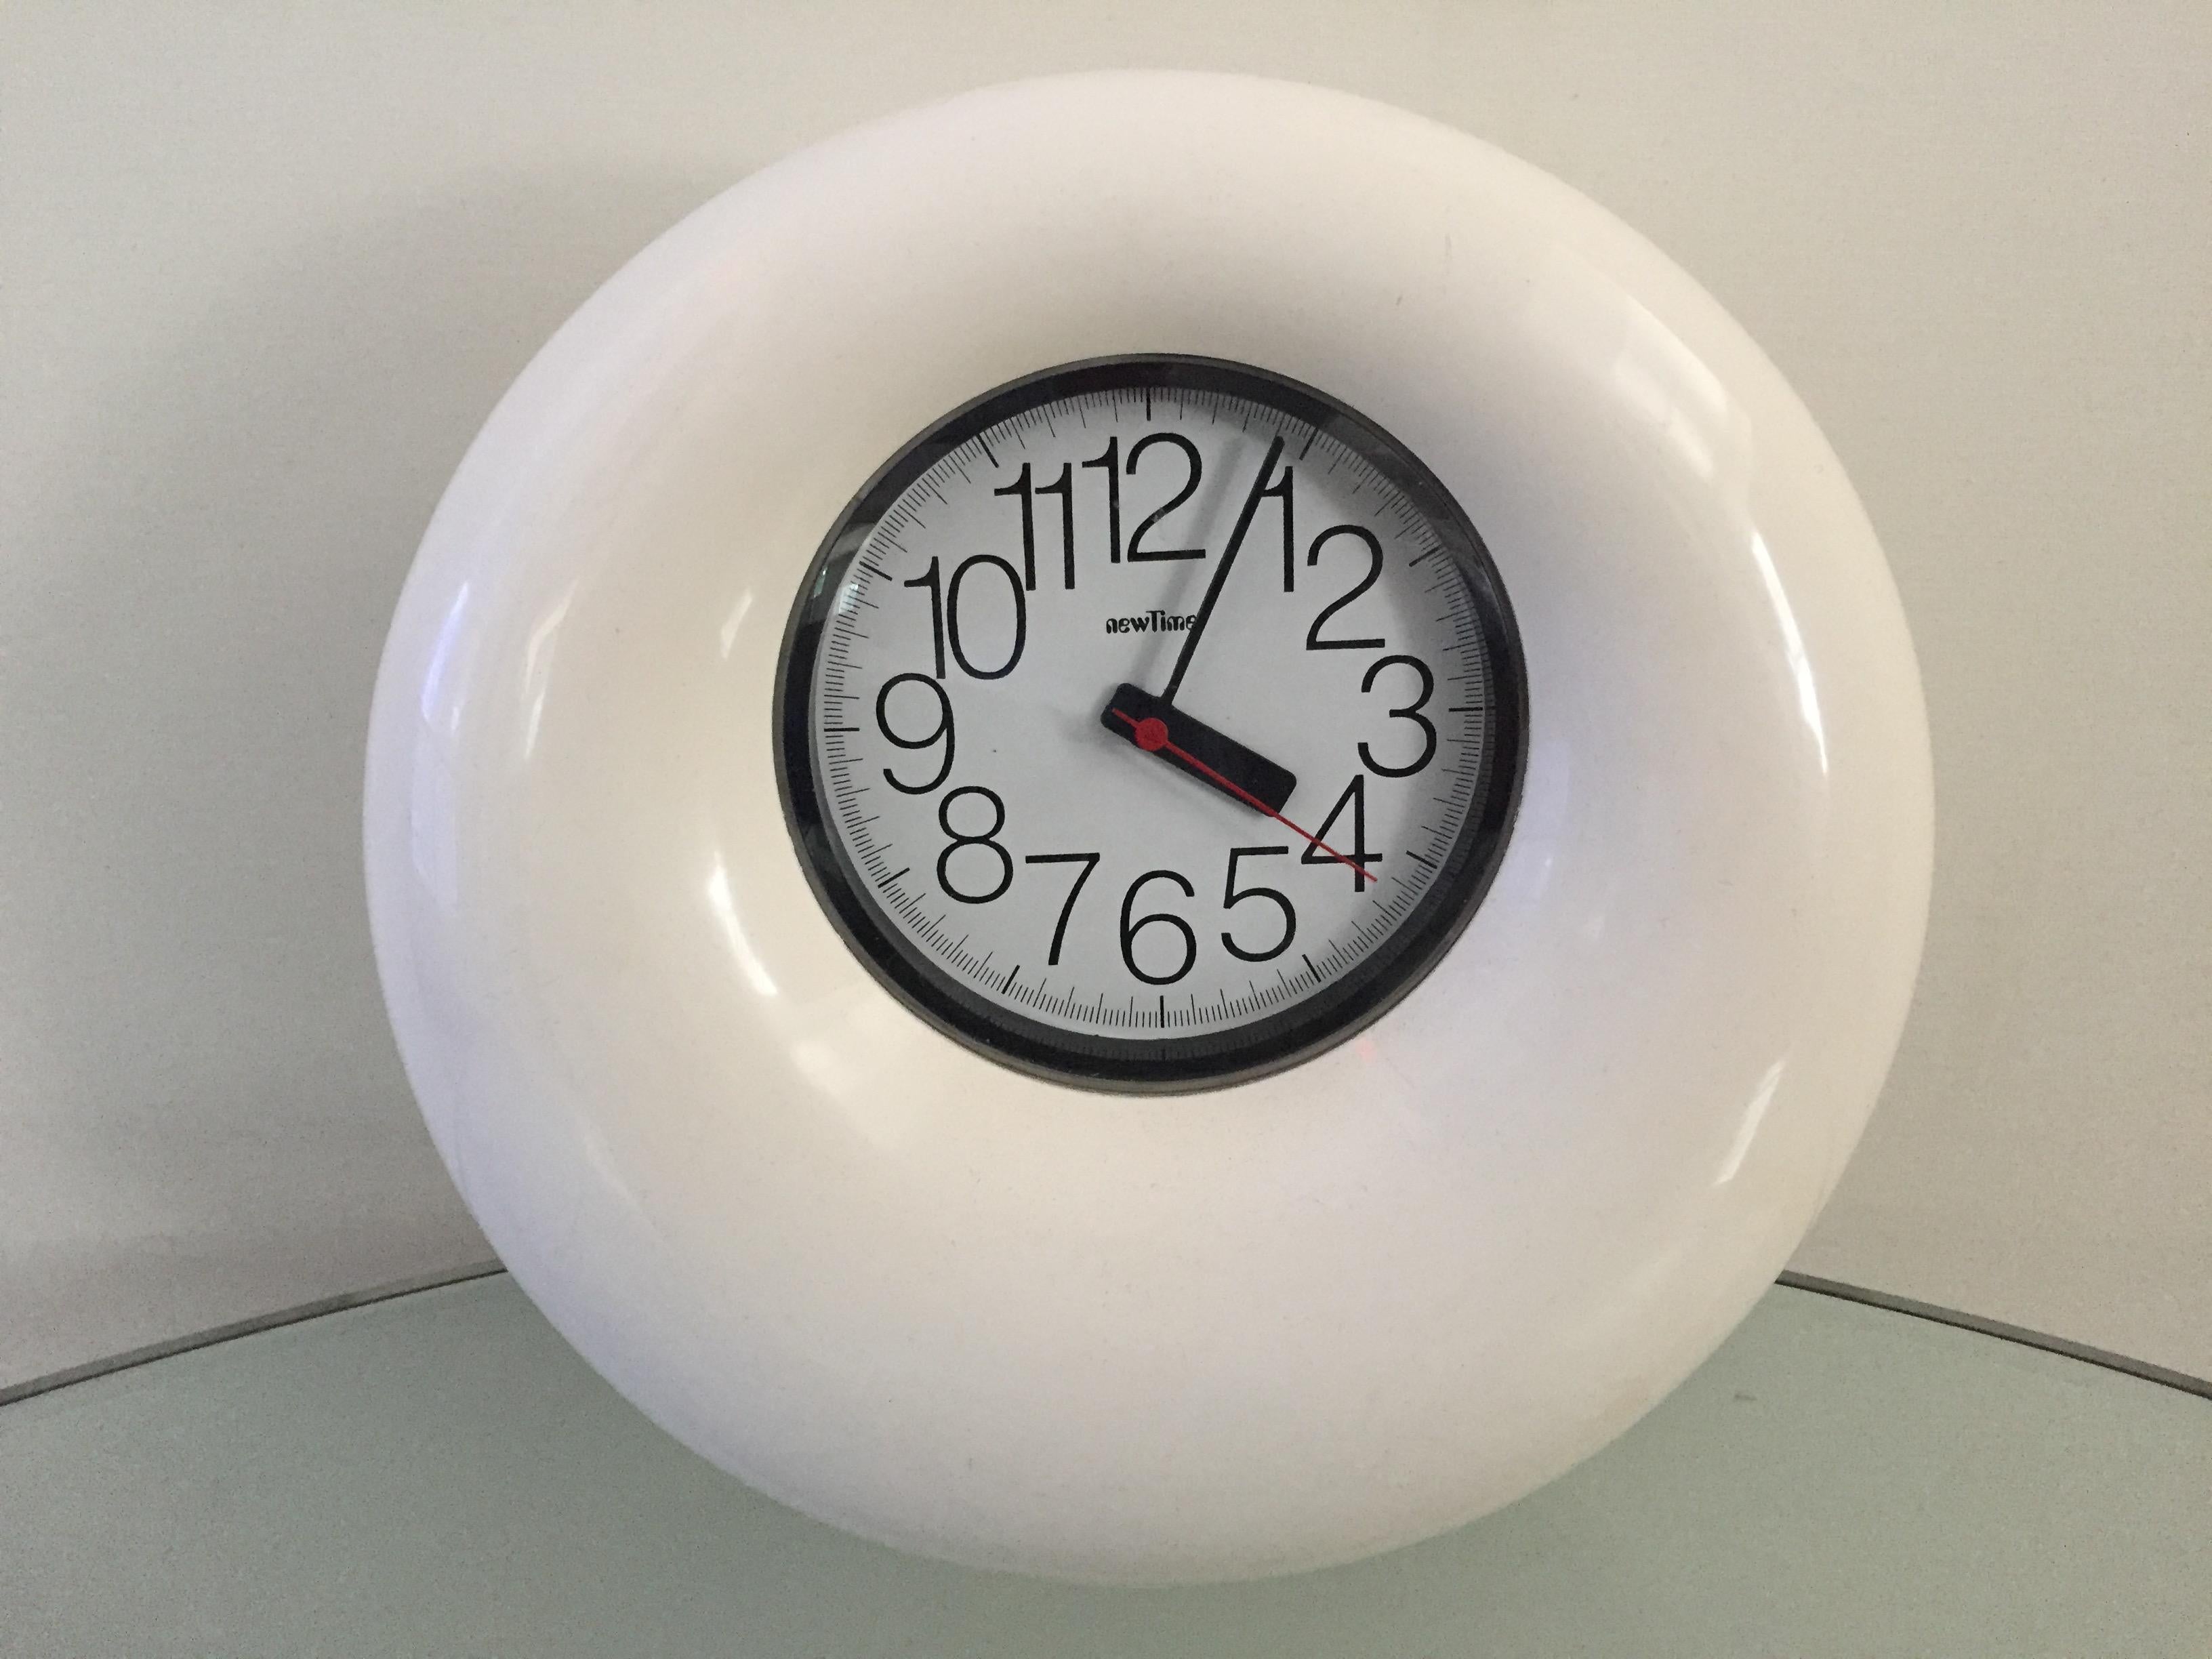 Bruno Porzio New time circular white plastic battery operated midcentury circular clock, red sweeping hand for seconds.